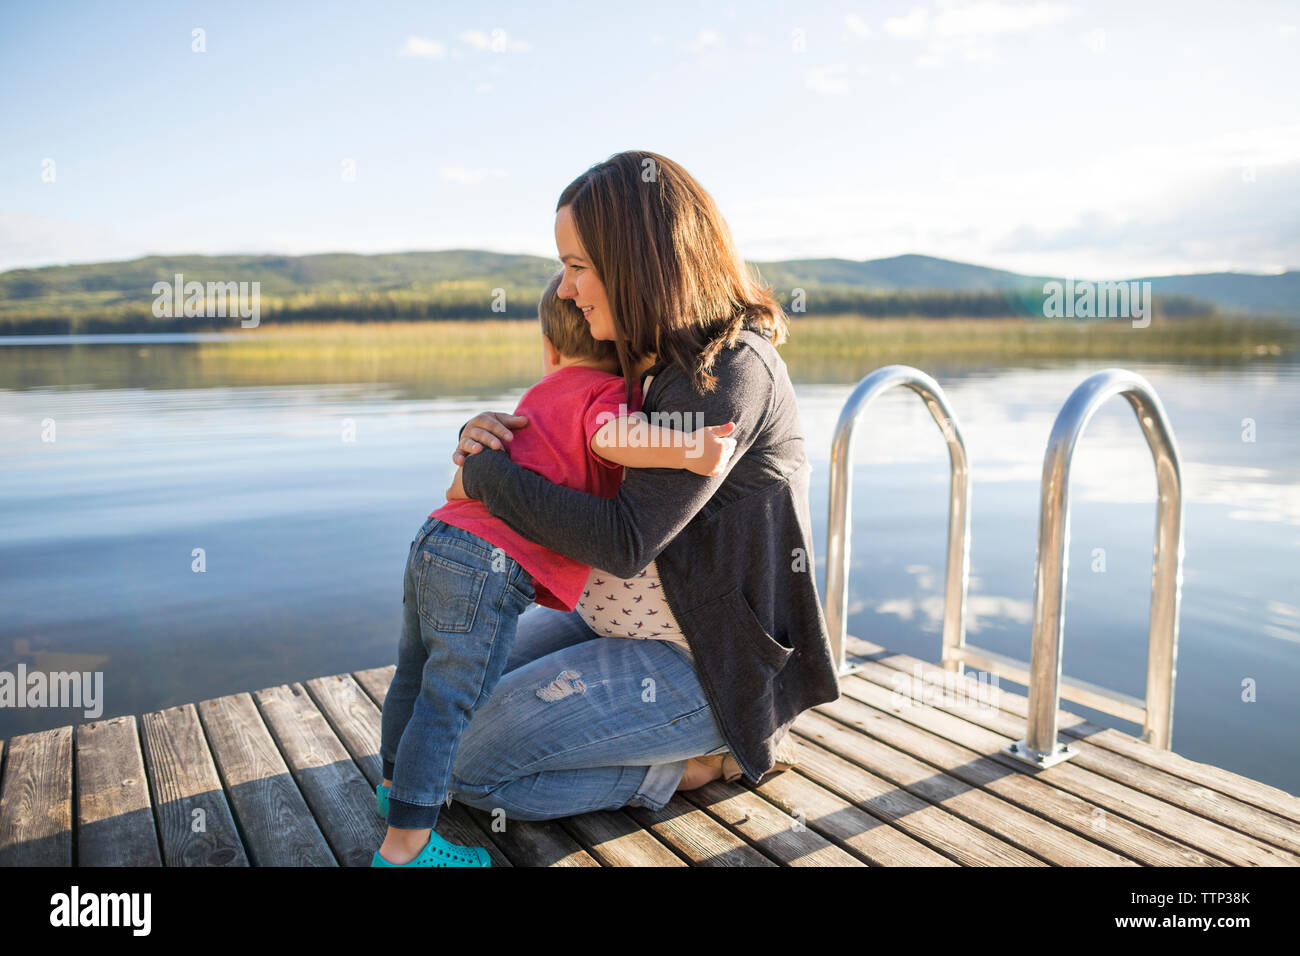 Loving son embracing pregnant mother on wooden pier over lake Stock Photo